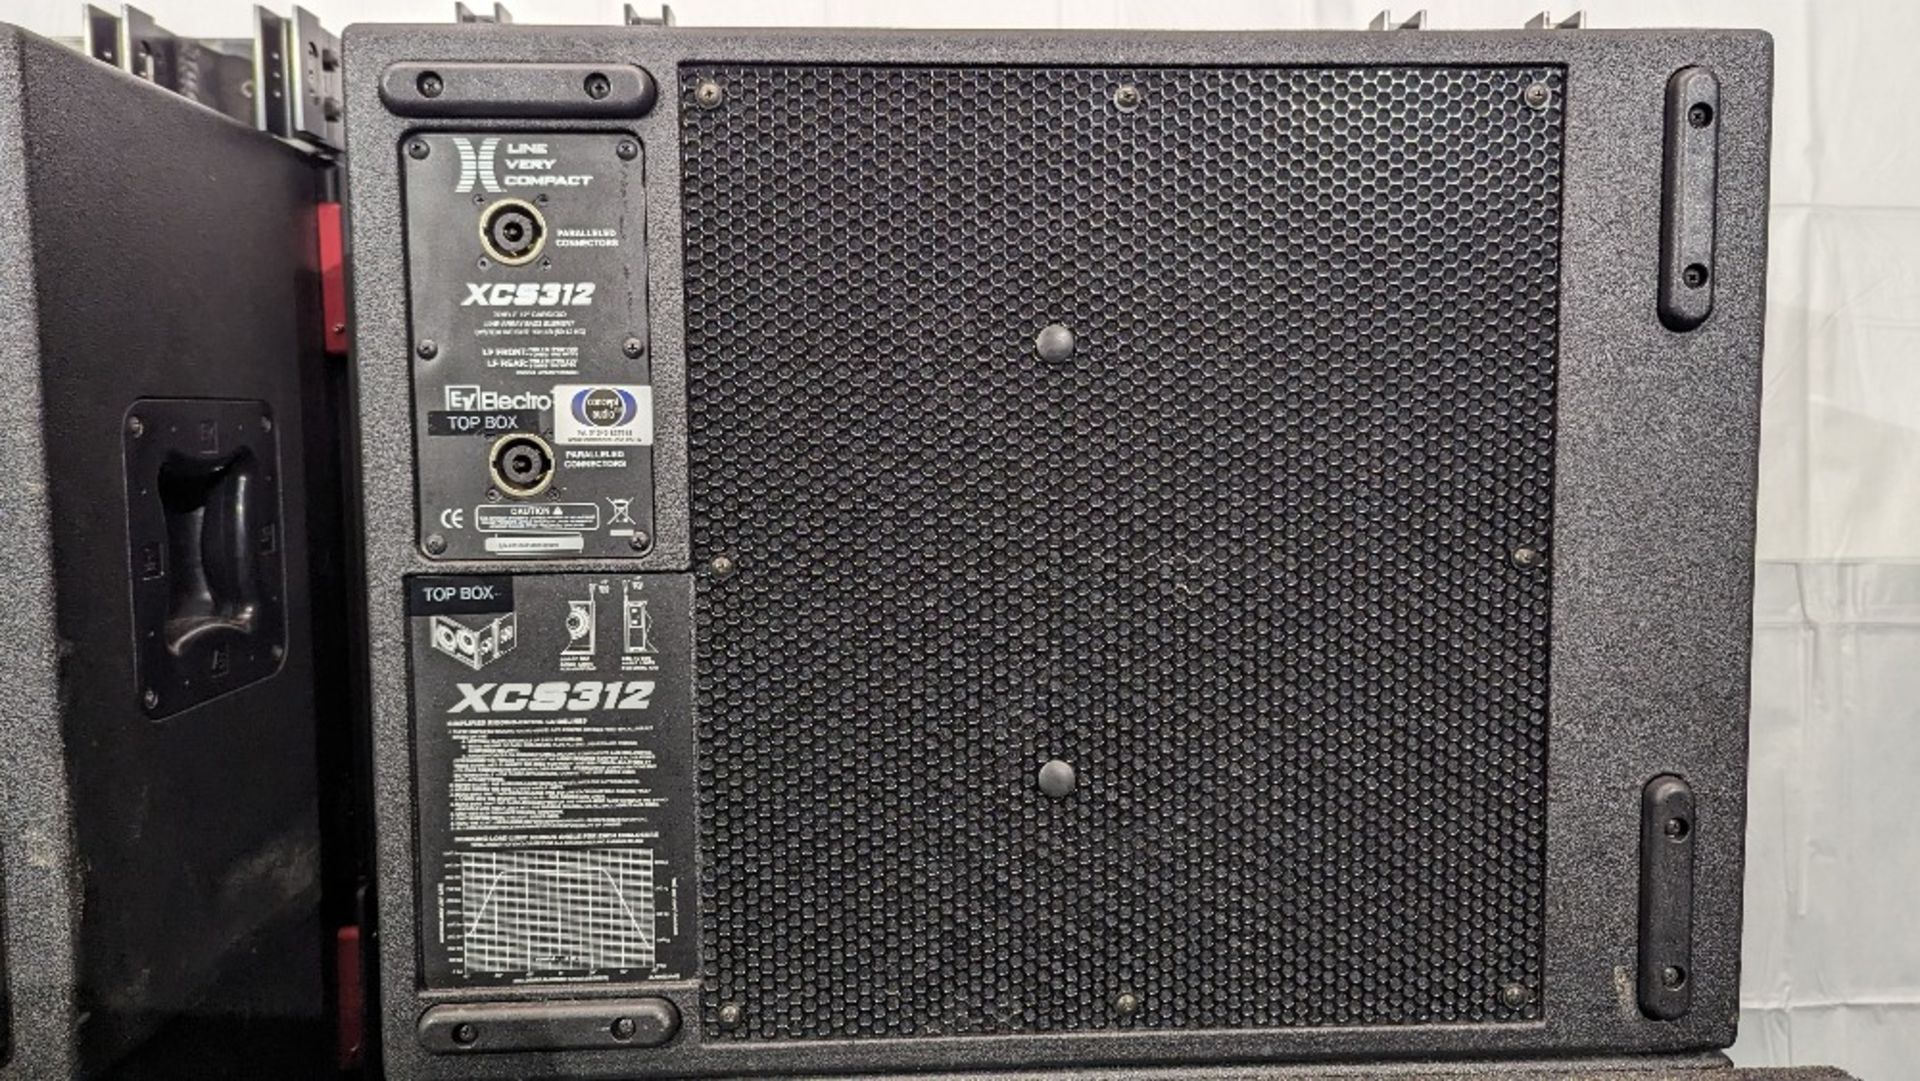 Electro-Voice PA Sound System - (12) XLE181 Speakers, (4) XCS312 Subs & Associated Equipment - Image 5 of 19